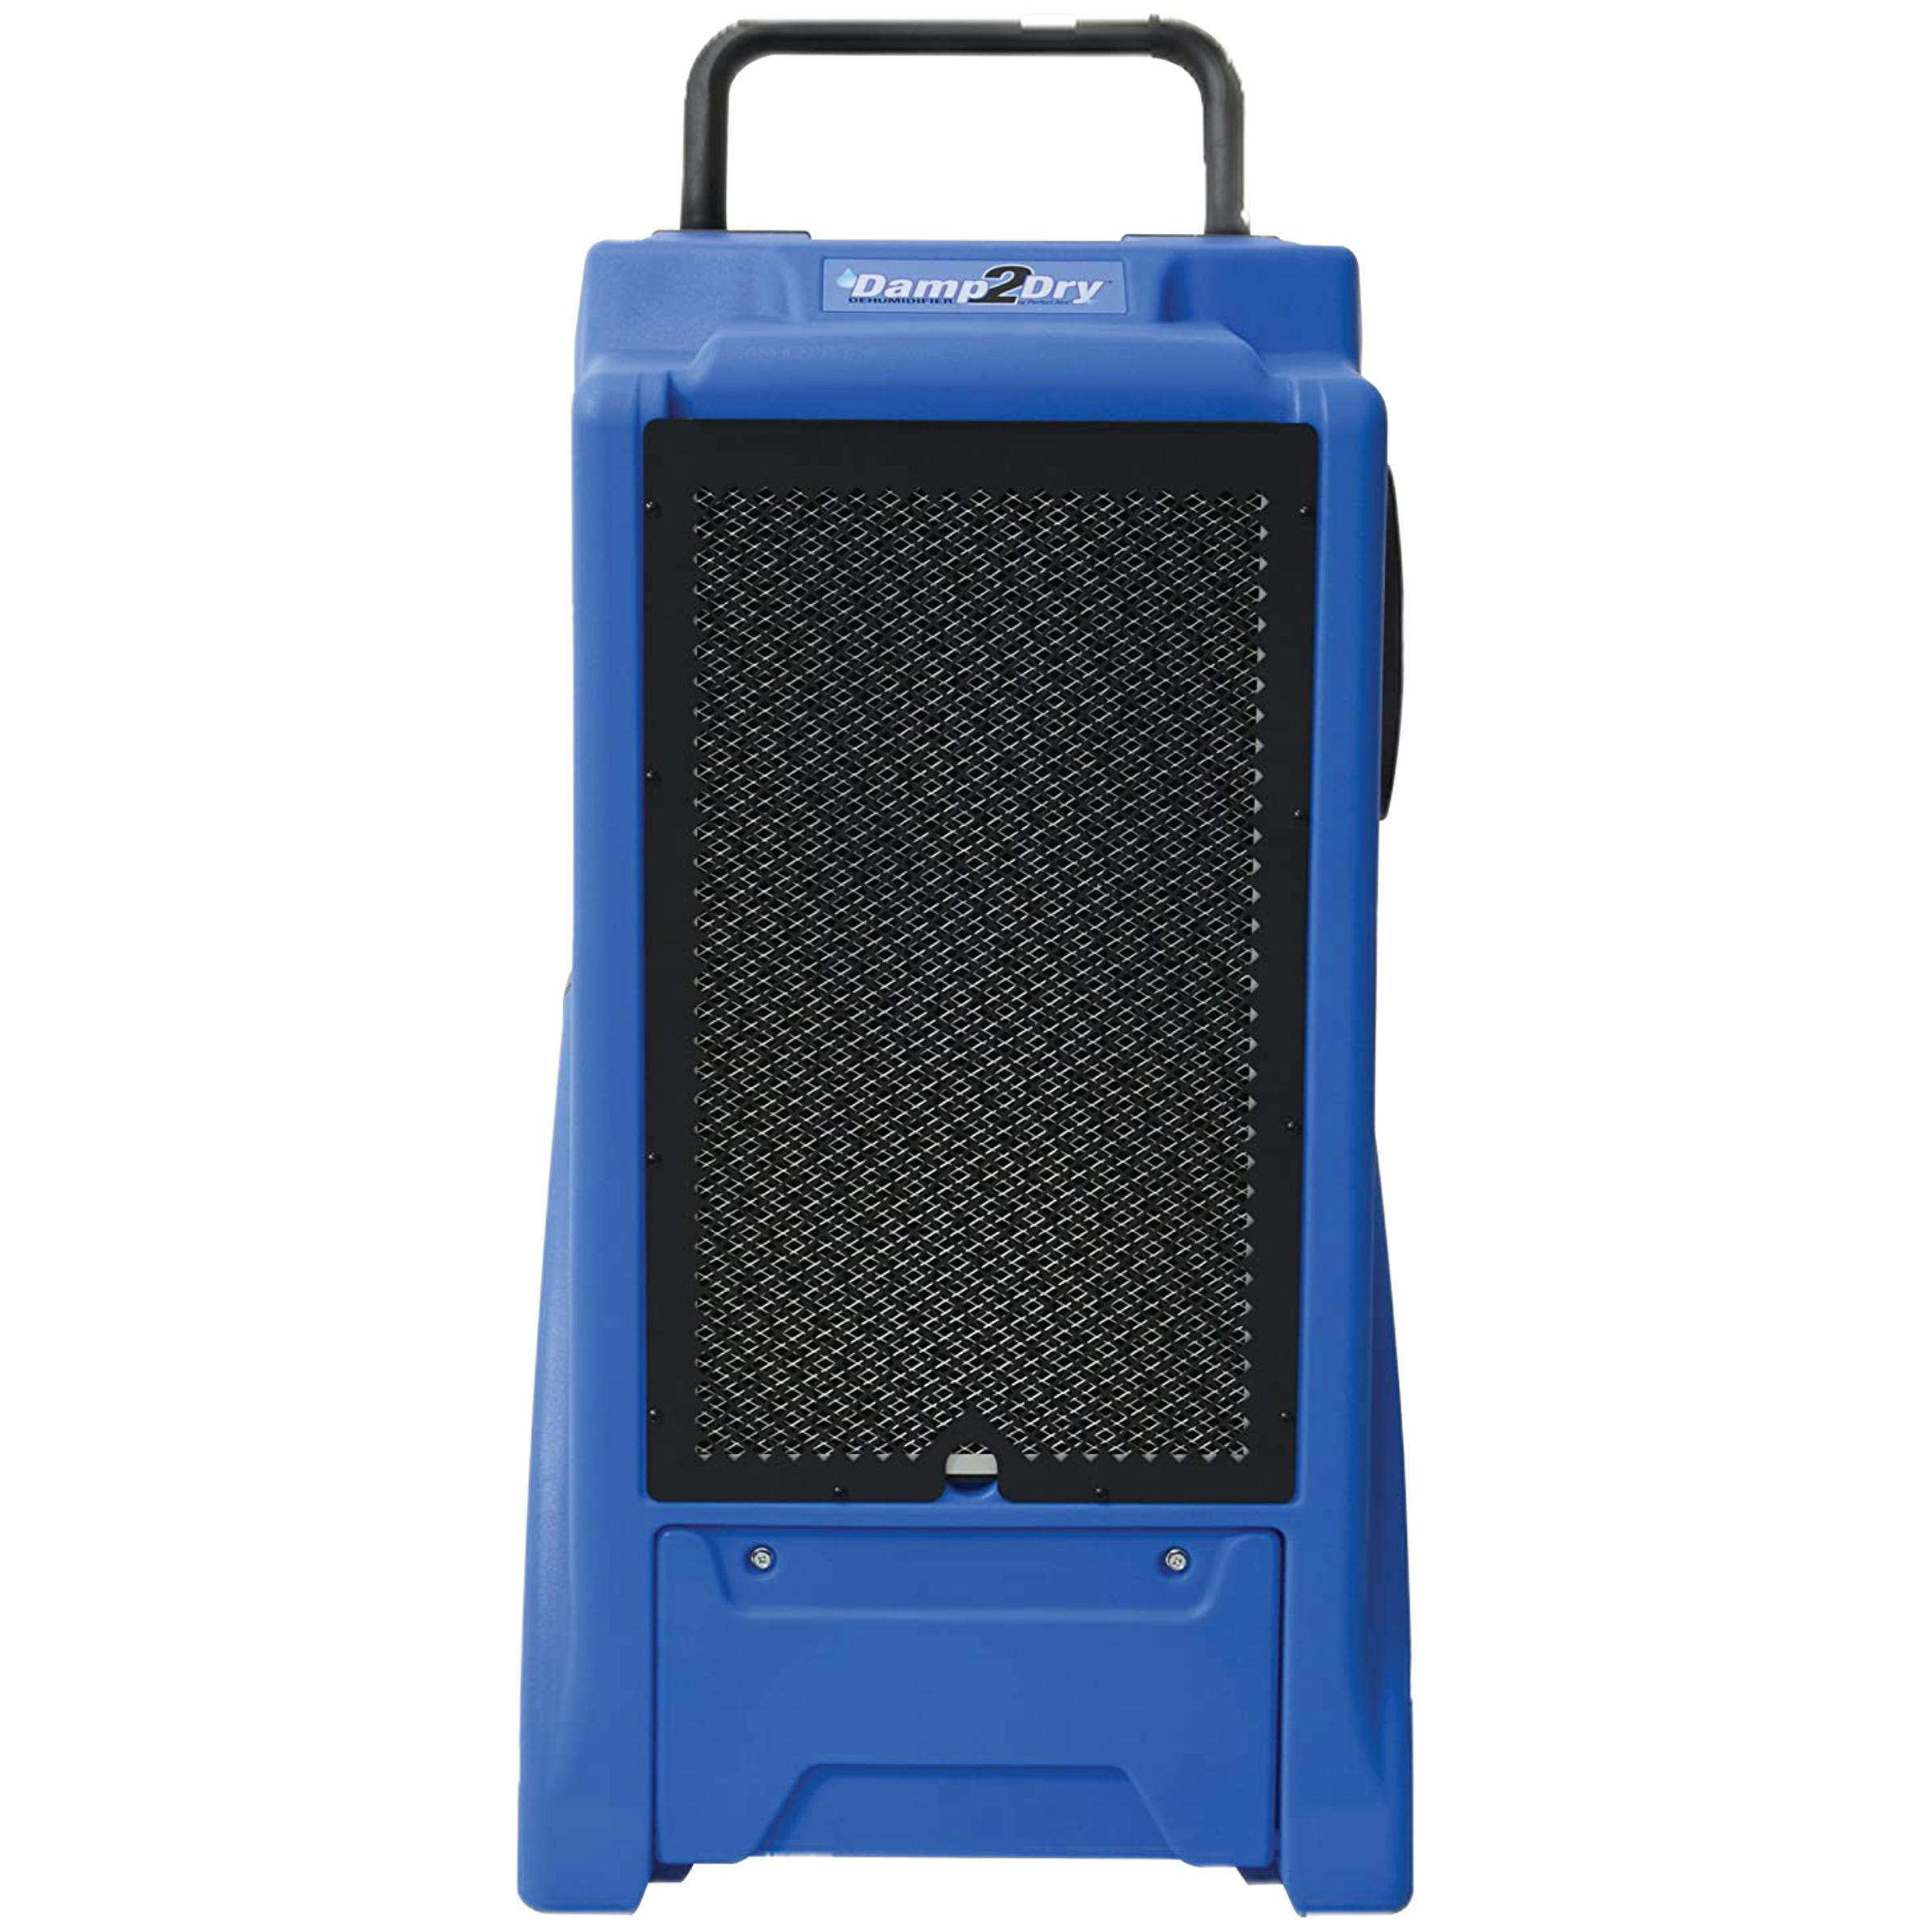 PerfectAire-Dehumidifier-1PACD250, Damp2Dry120 Liter/250 Pint Commercial Dehumidifier, Built-In Pump